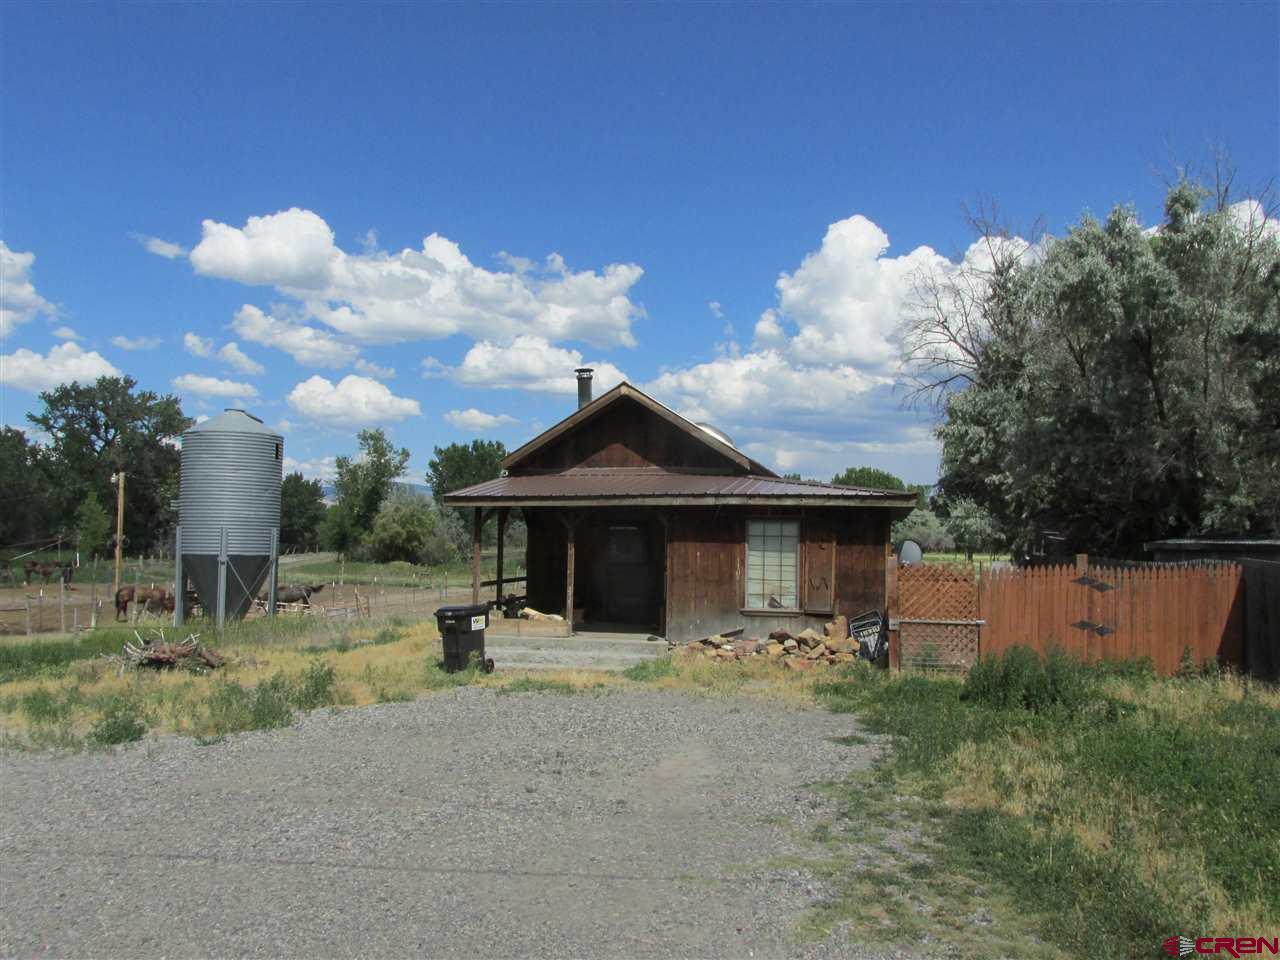 Superior Investment Property! 16.81 acres (MOL) zoned B-4 and R-3 within the City of Montrose and next to the new Colorado Outdoors 164-acre multi-use river development. Sizeable acreage for commercial and/or residential development. Property has 696 sq.ft. 1bd/1ba home, pasture, ponds and horse stalls that are currently leased. Property also has irrigation rights. Beautiful acreage and nature views. The possibilities are endless with this land! There is an estimated 2021 split fee of $500 for UVWUA for this property.